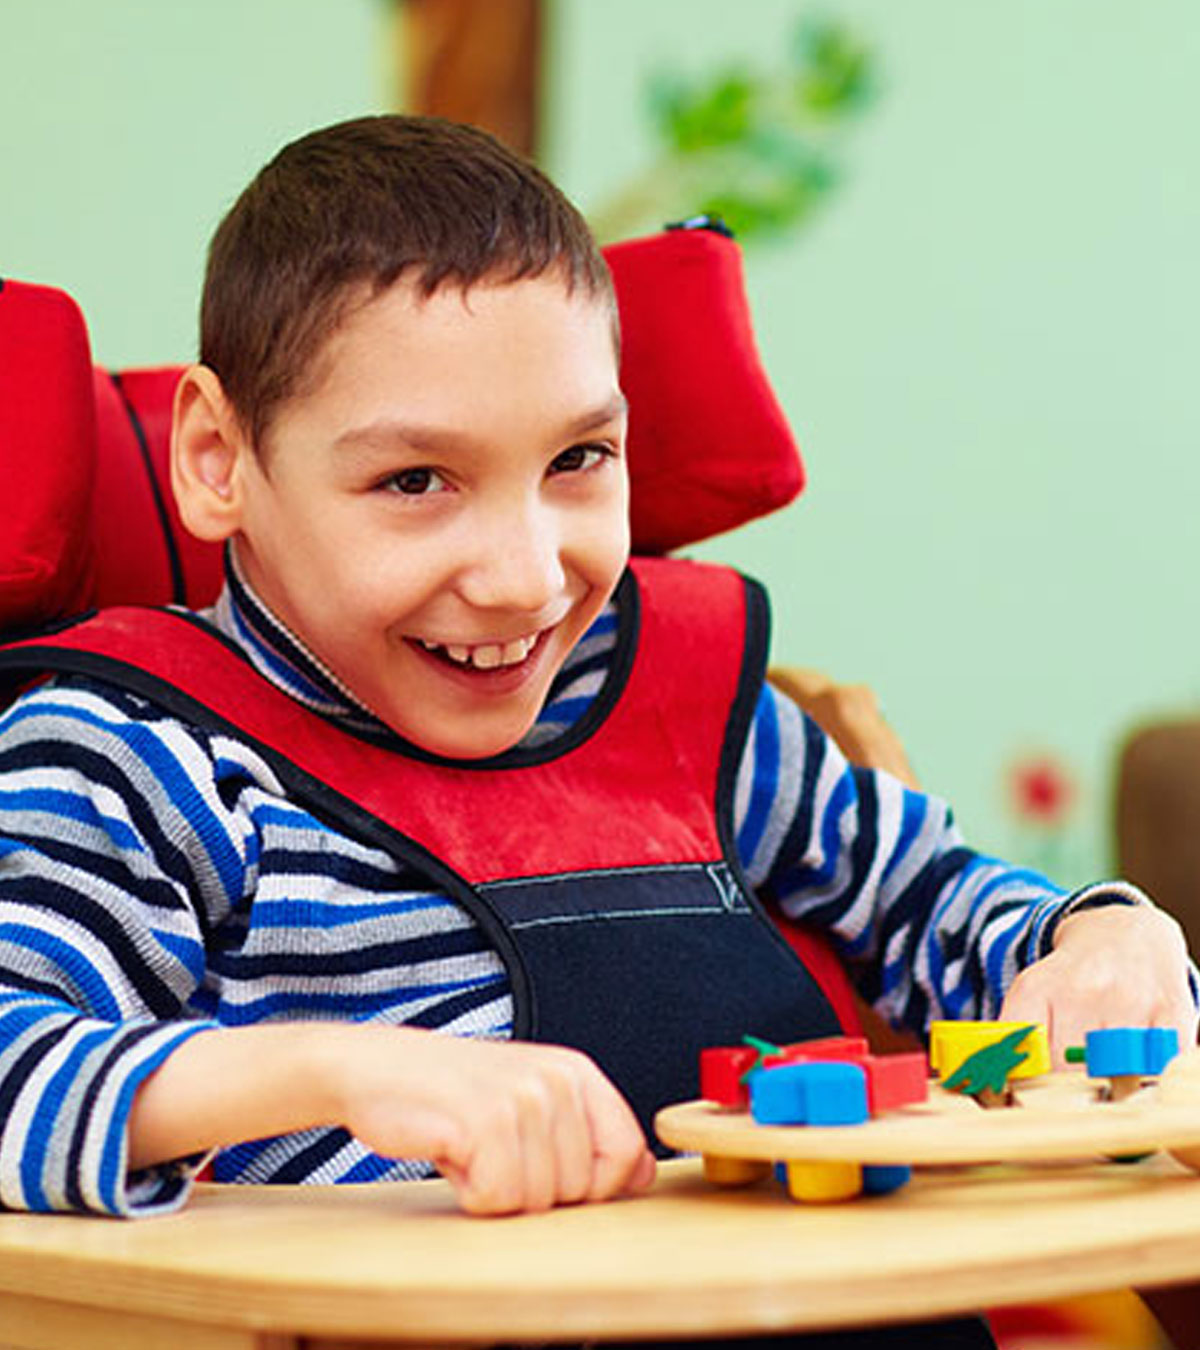 15-Brilliant-Toys-For-Autistic-Children-To-Play-And-Learn.jpg